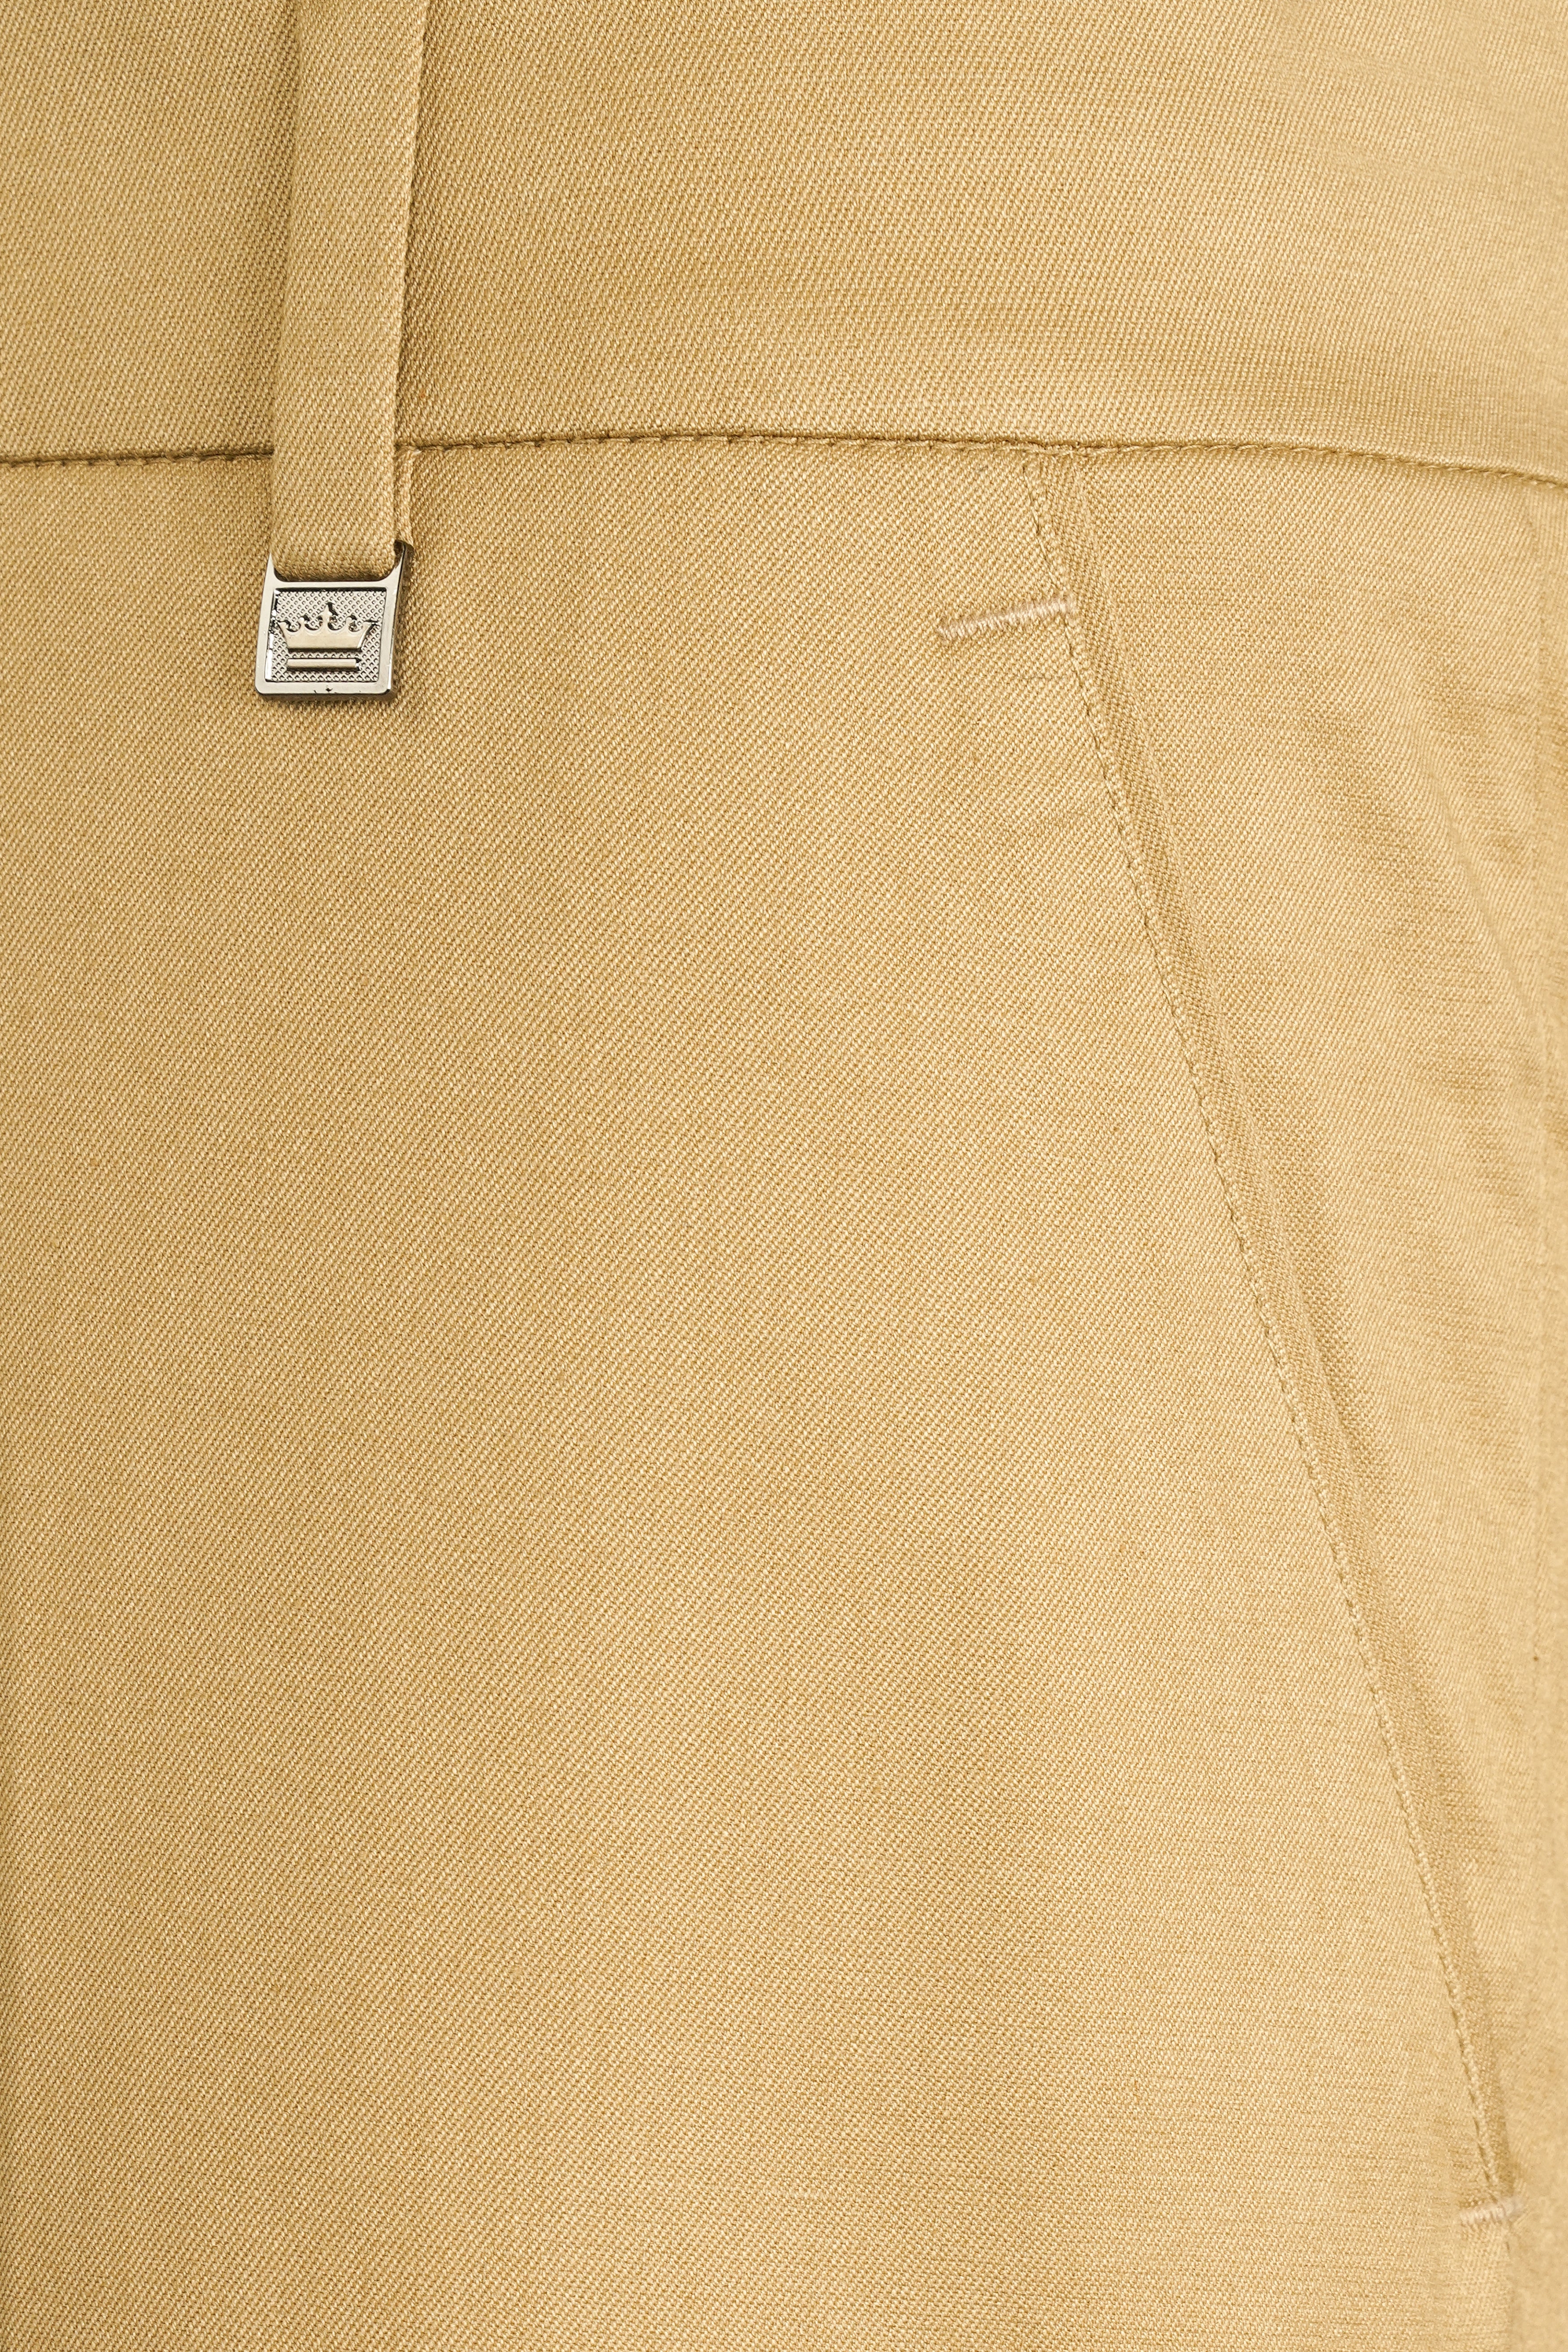 Twine Beige Wool Rich Double Breasted Suit ST3107-DB-36, ST3107-DB-38, ST3107-DB-40, ST3107-DB-42, ST3107-DB-44, ST3107-DB-46, ST3107-DB-48, ST3107-DB-50, ST3107-DB-52, ST3107-DB-54, ST3107-DB-56, ST3107-DB-58, ST3107-DB-60